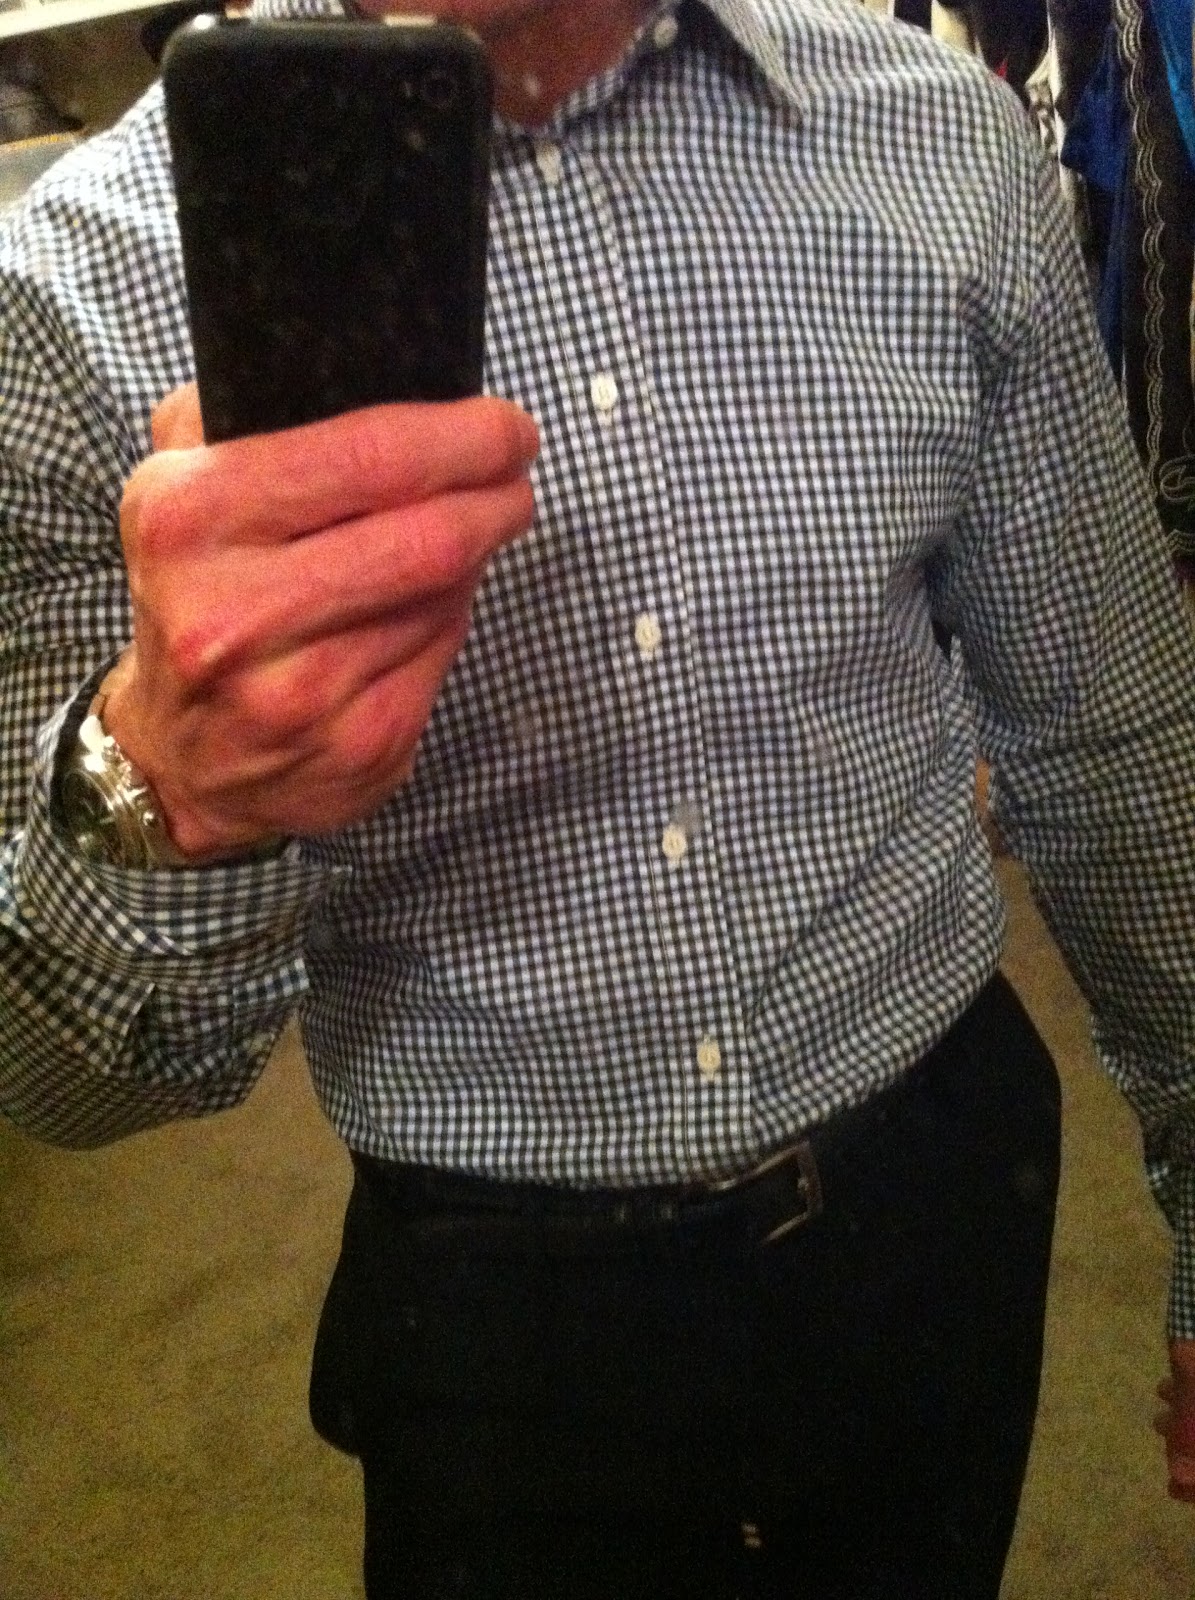 Indochino Shirt Review by Mike